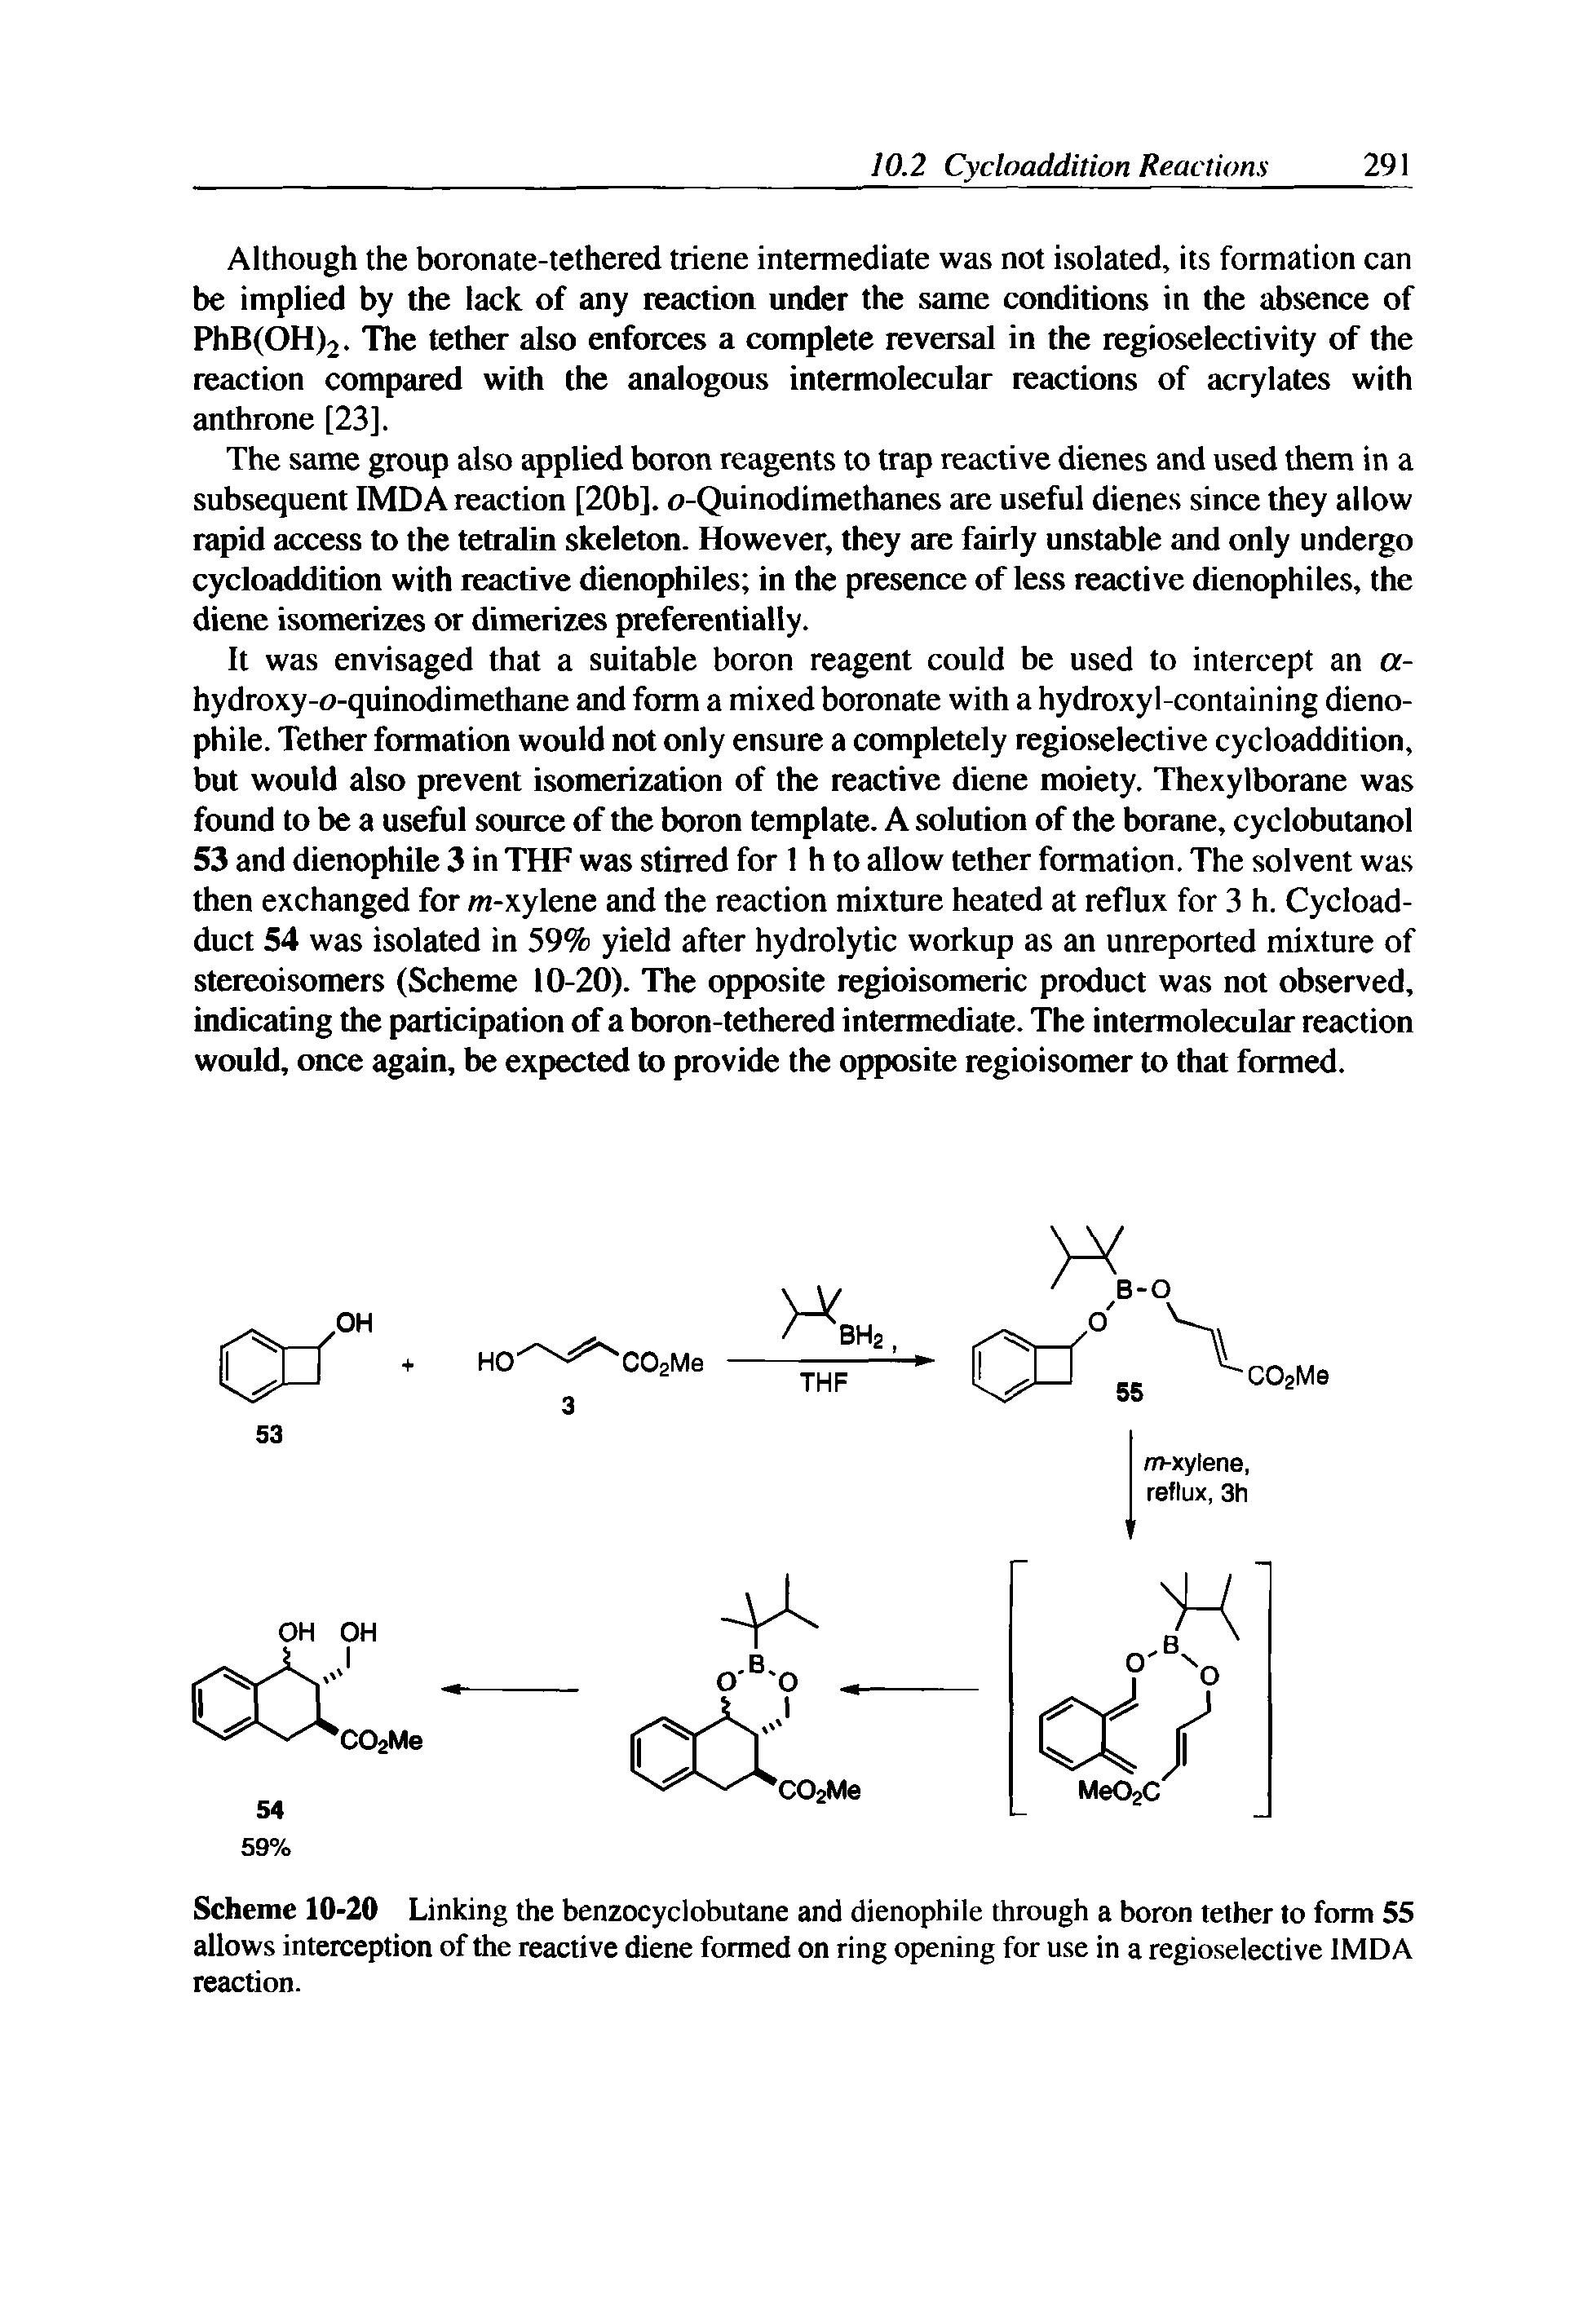 Scheme 10-20 Linking the benzocyclobutane and dienophile through a boron tether to form 55 allows interception of the reactive diene formed on ring opening for use in a regioselective IMDA reaction.